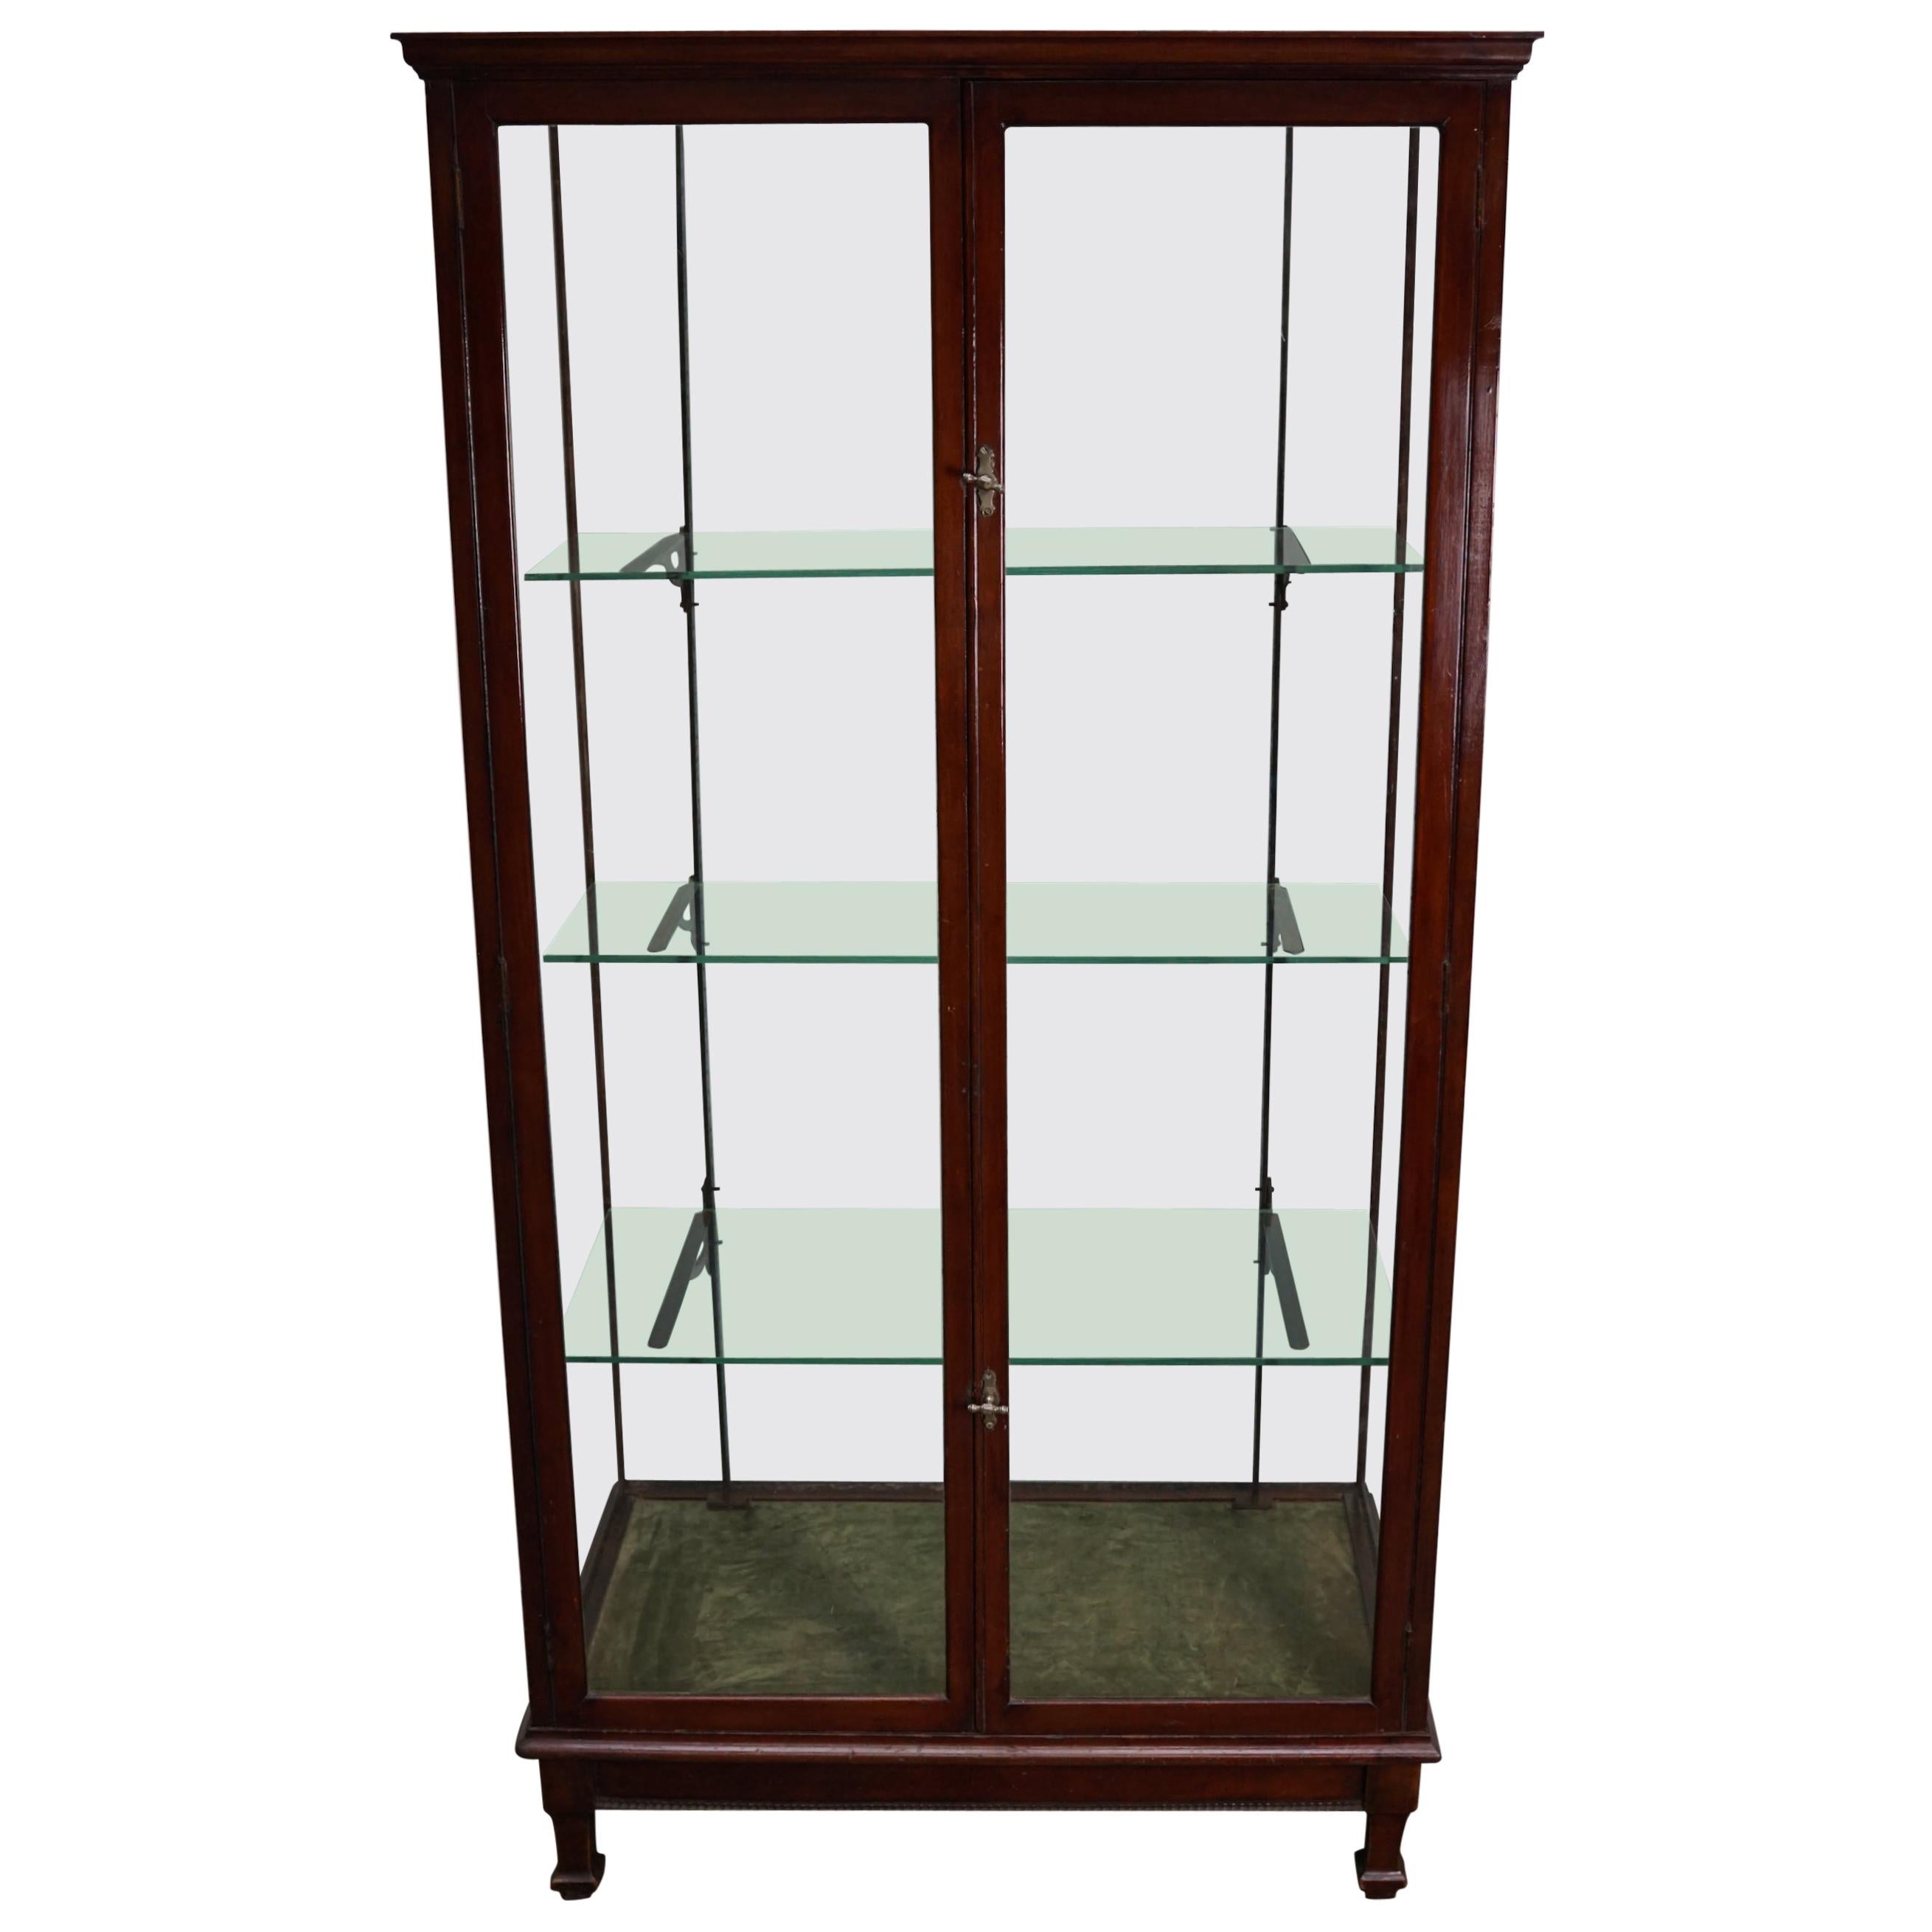 Victorian Mahogany Museum / Shop Display Cabinet or Vitrine, Late 19th Century For Sale